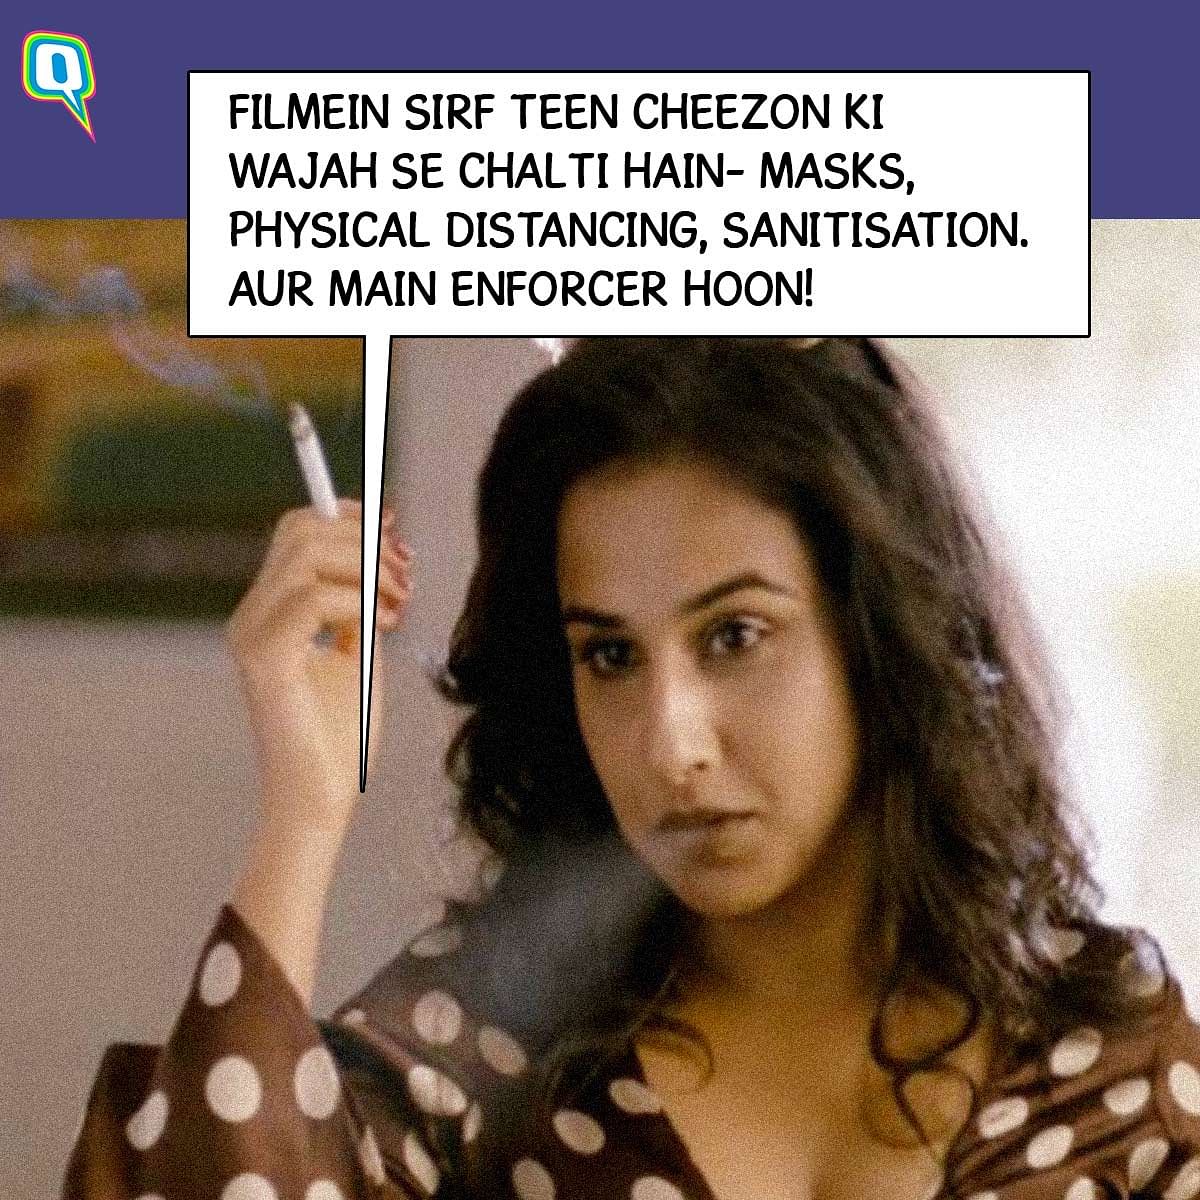 The next time you plan to hangout with friends these  tweaked Bollywood dialogues could come in handy. 